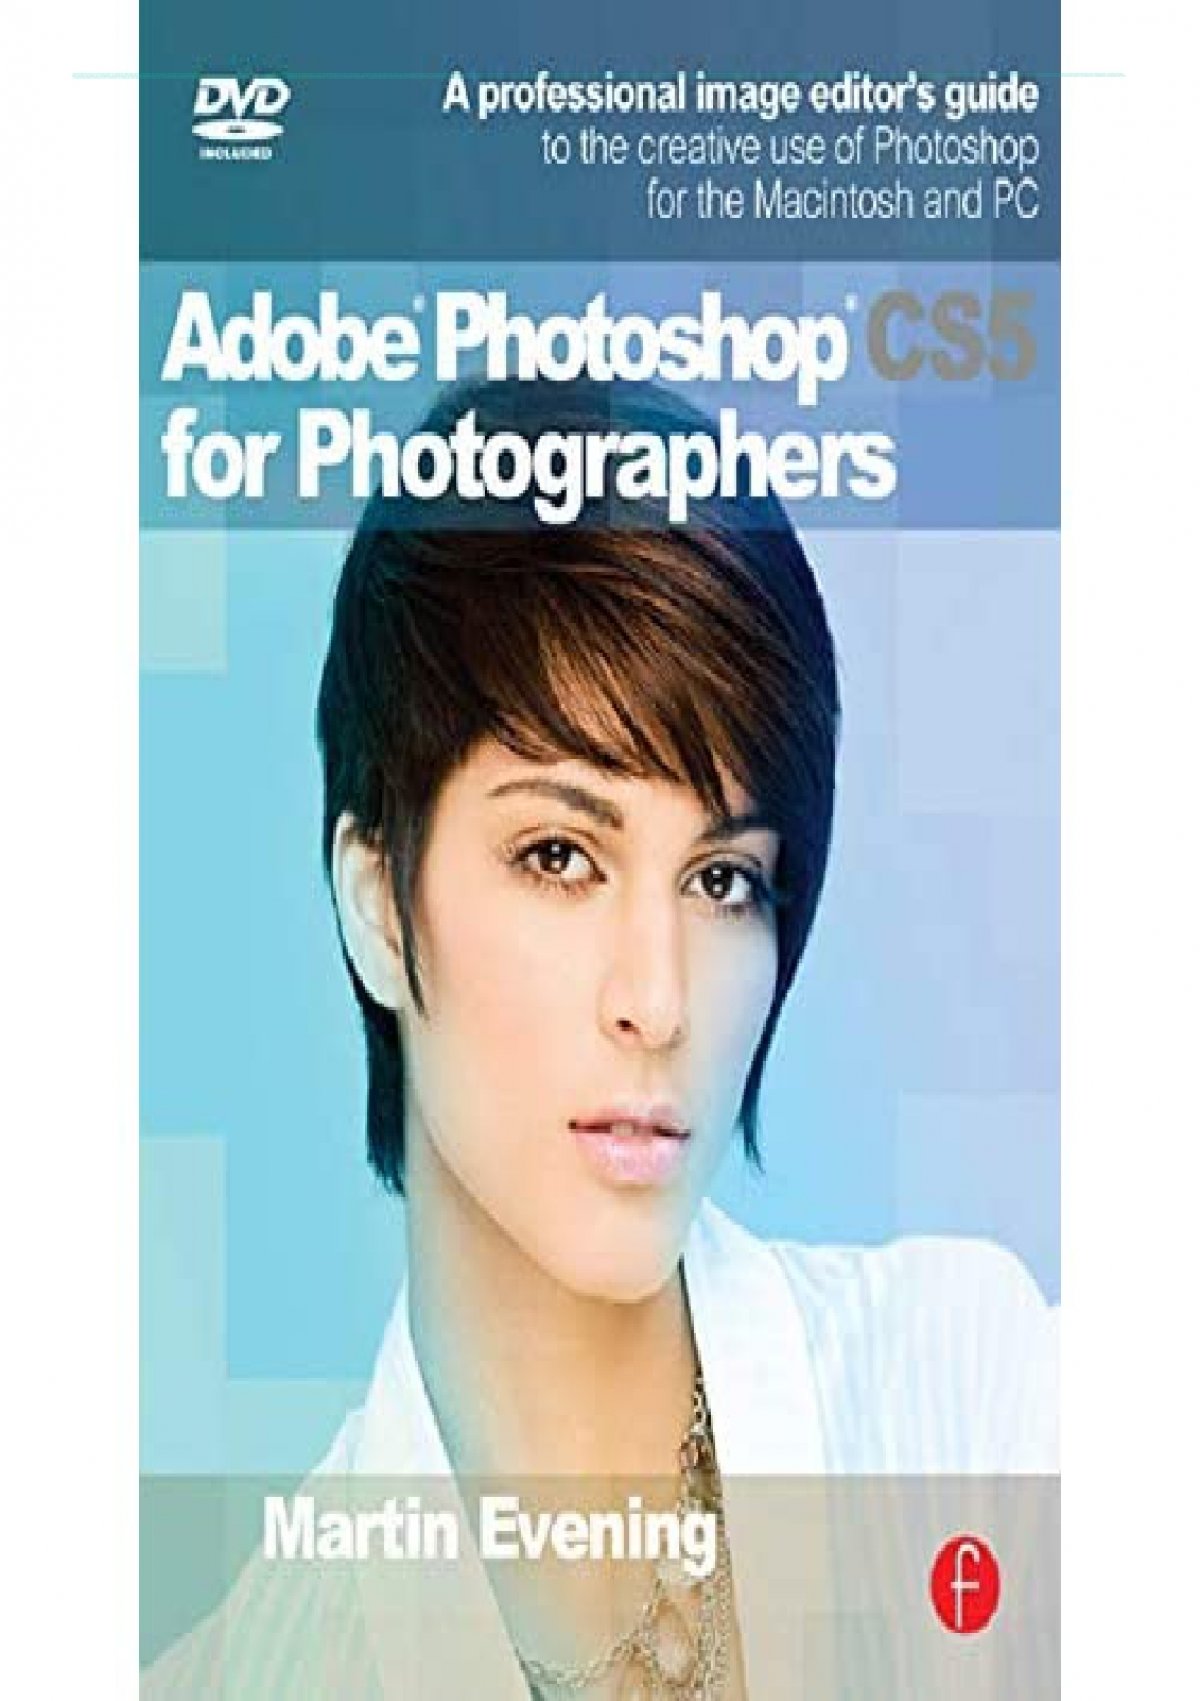 adobe photoshop cs5 for photographers the ultimate workshop pdf download